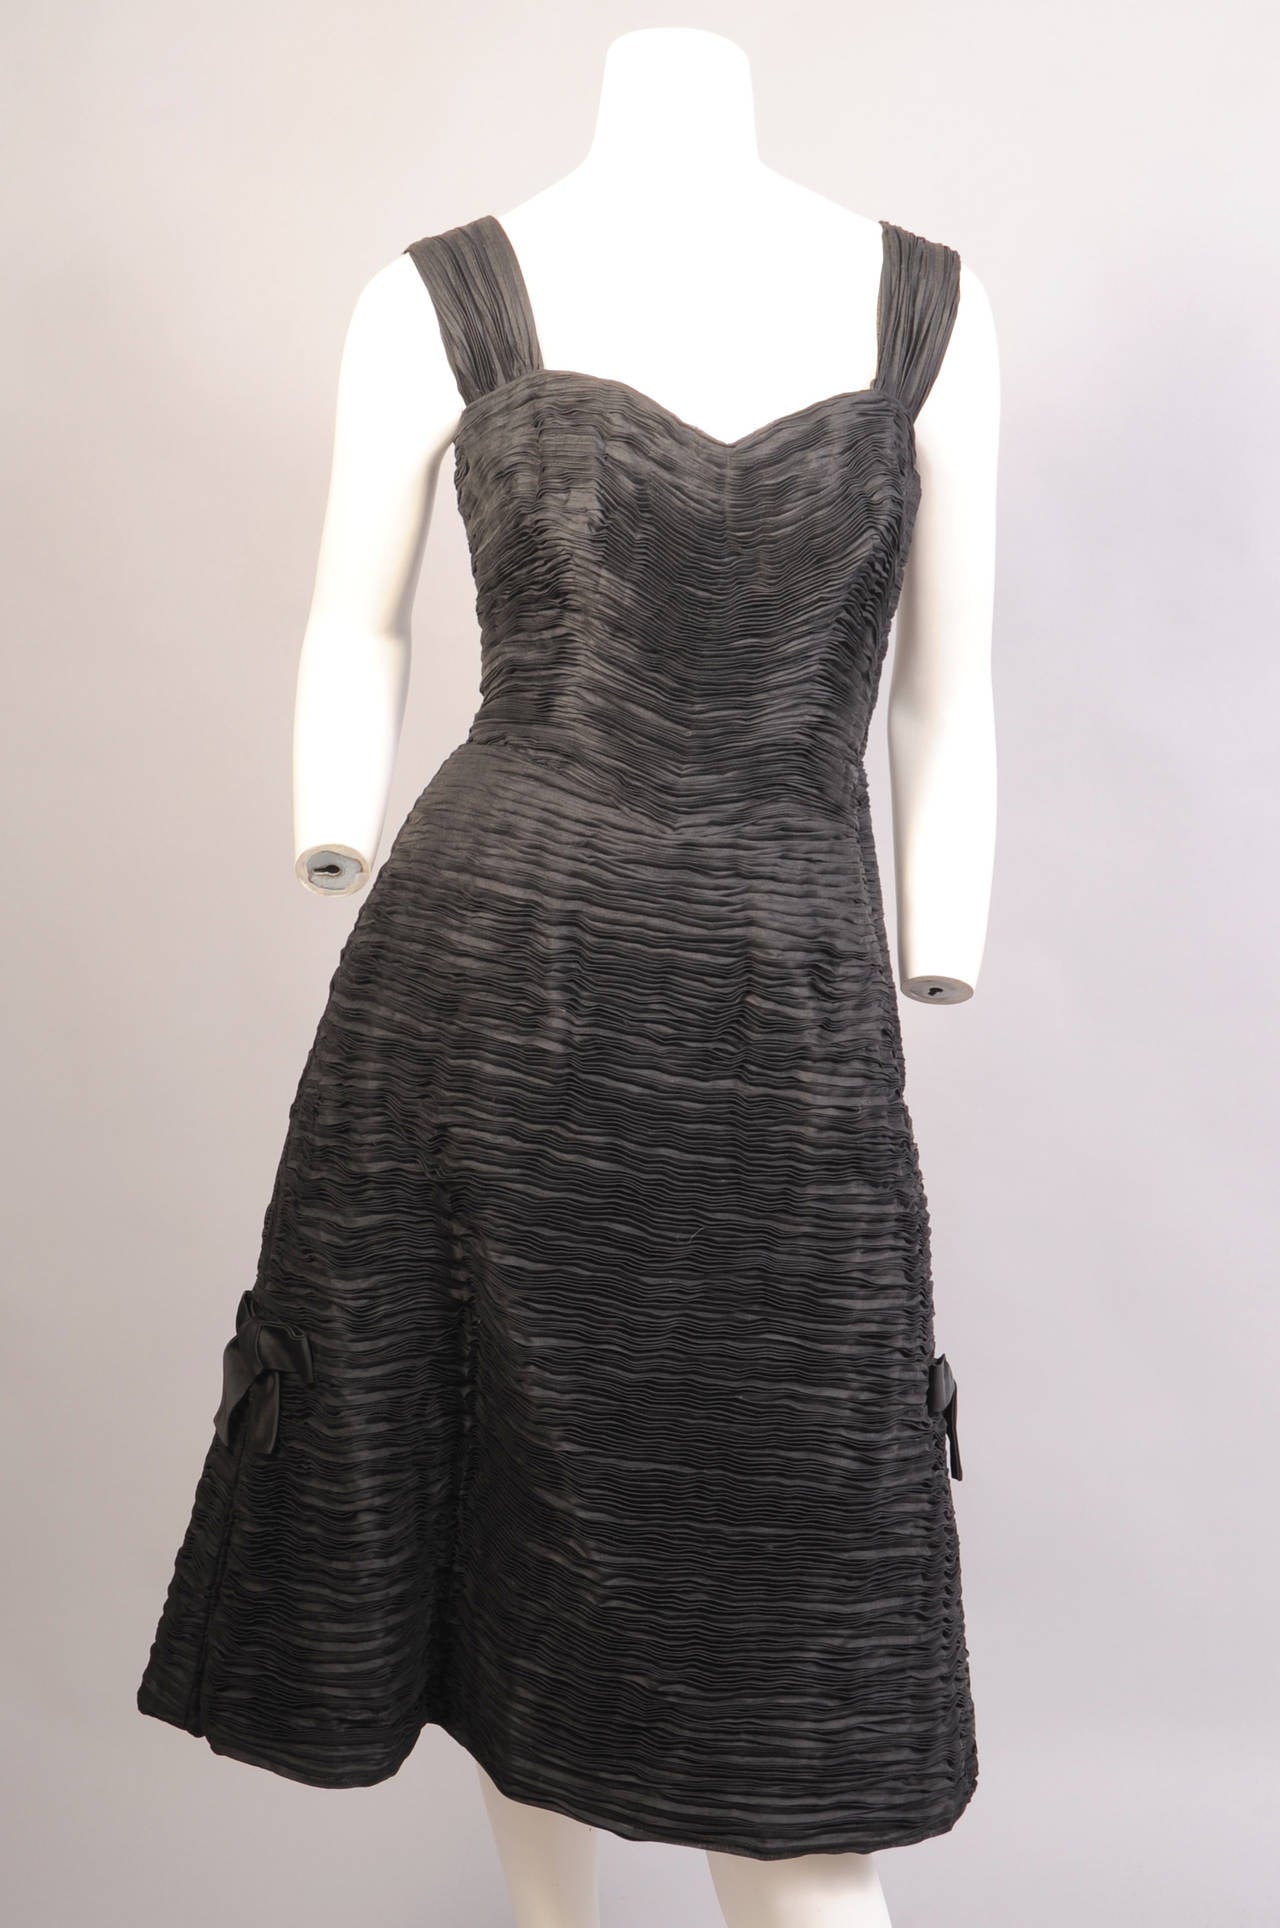 This inky black pleated linen dress is so elegant. The dress has wide straps , a sweetheart neckline with a boned bodice and a left side zipper above a full skirt. The skirt is trimmed with black silk bows on either side above an inverted pleat. The